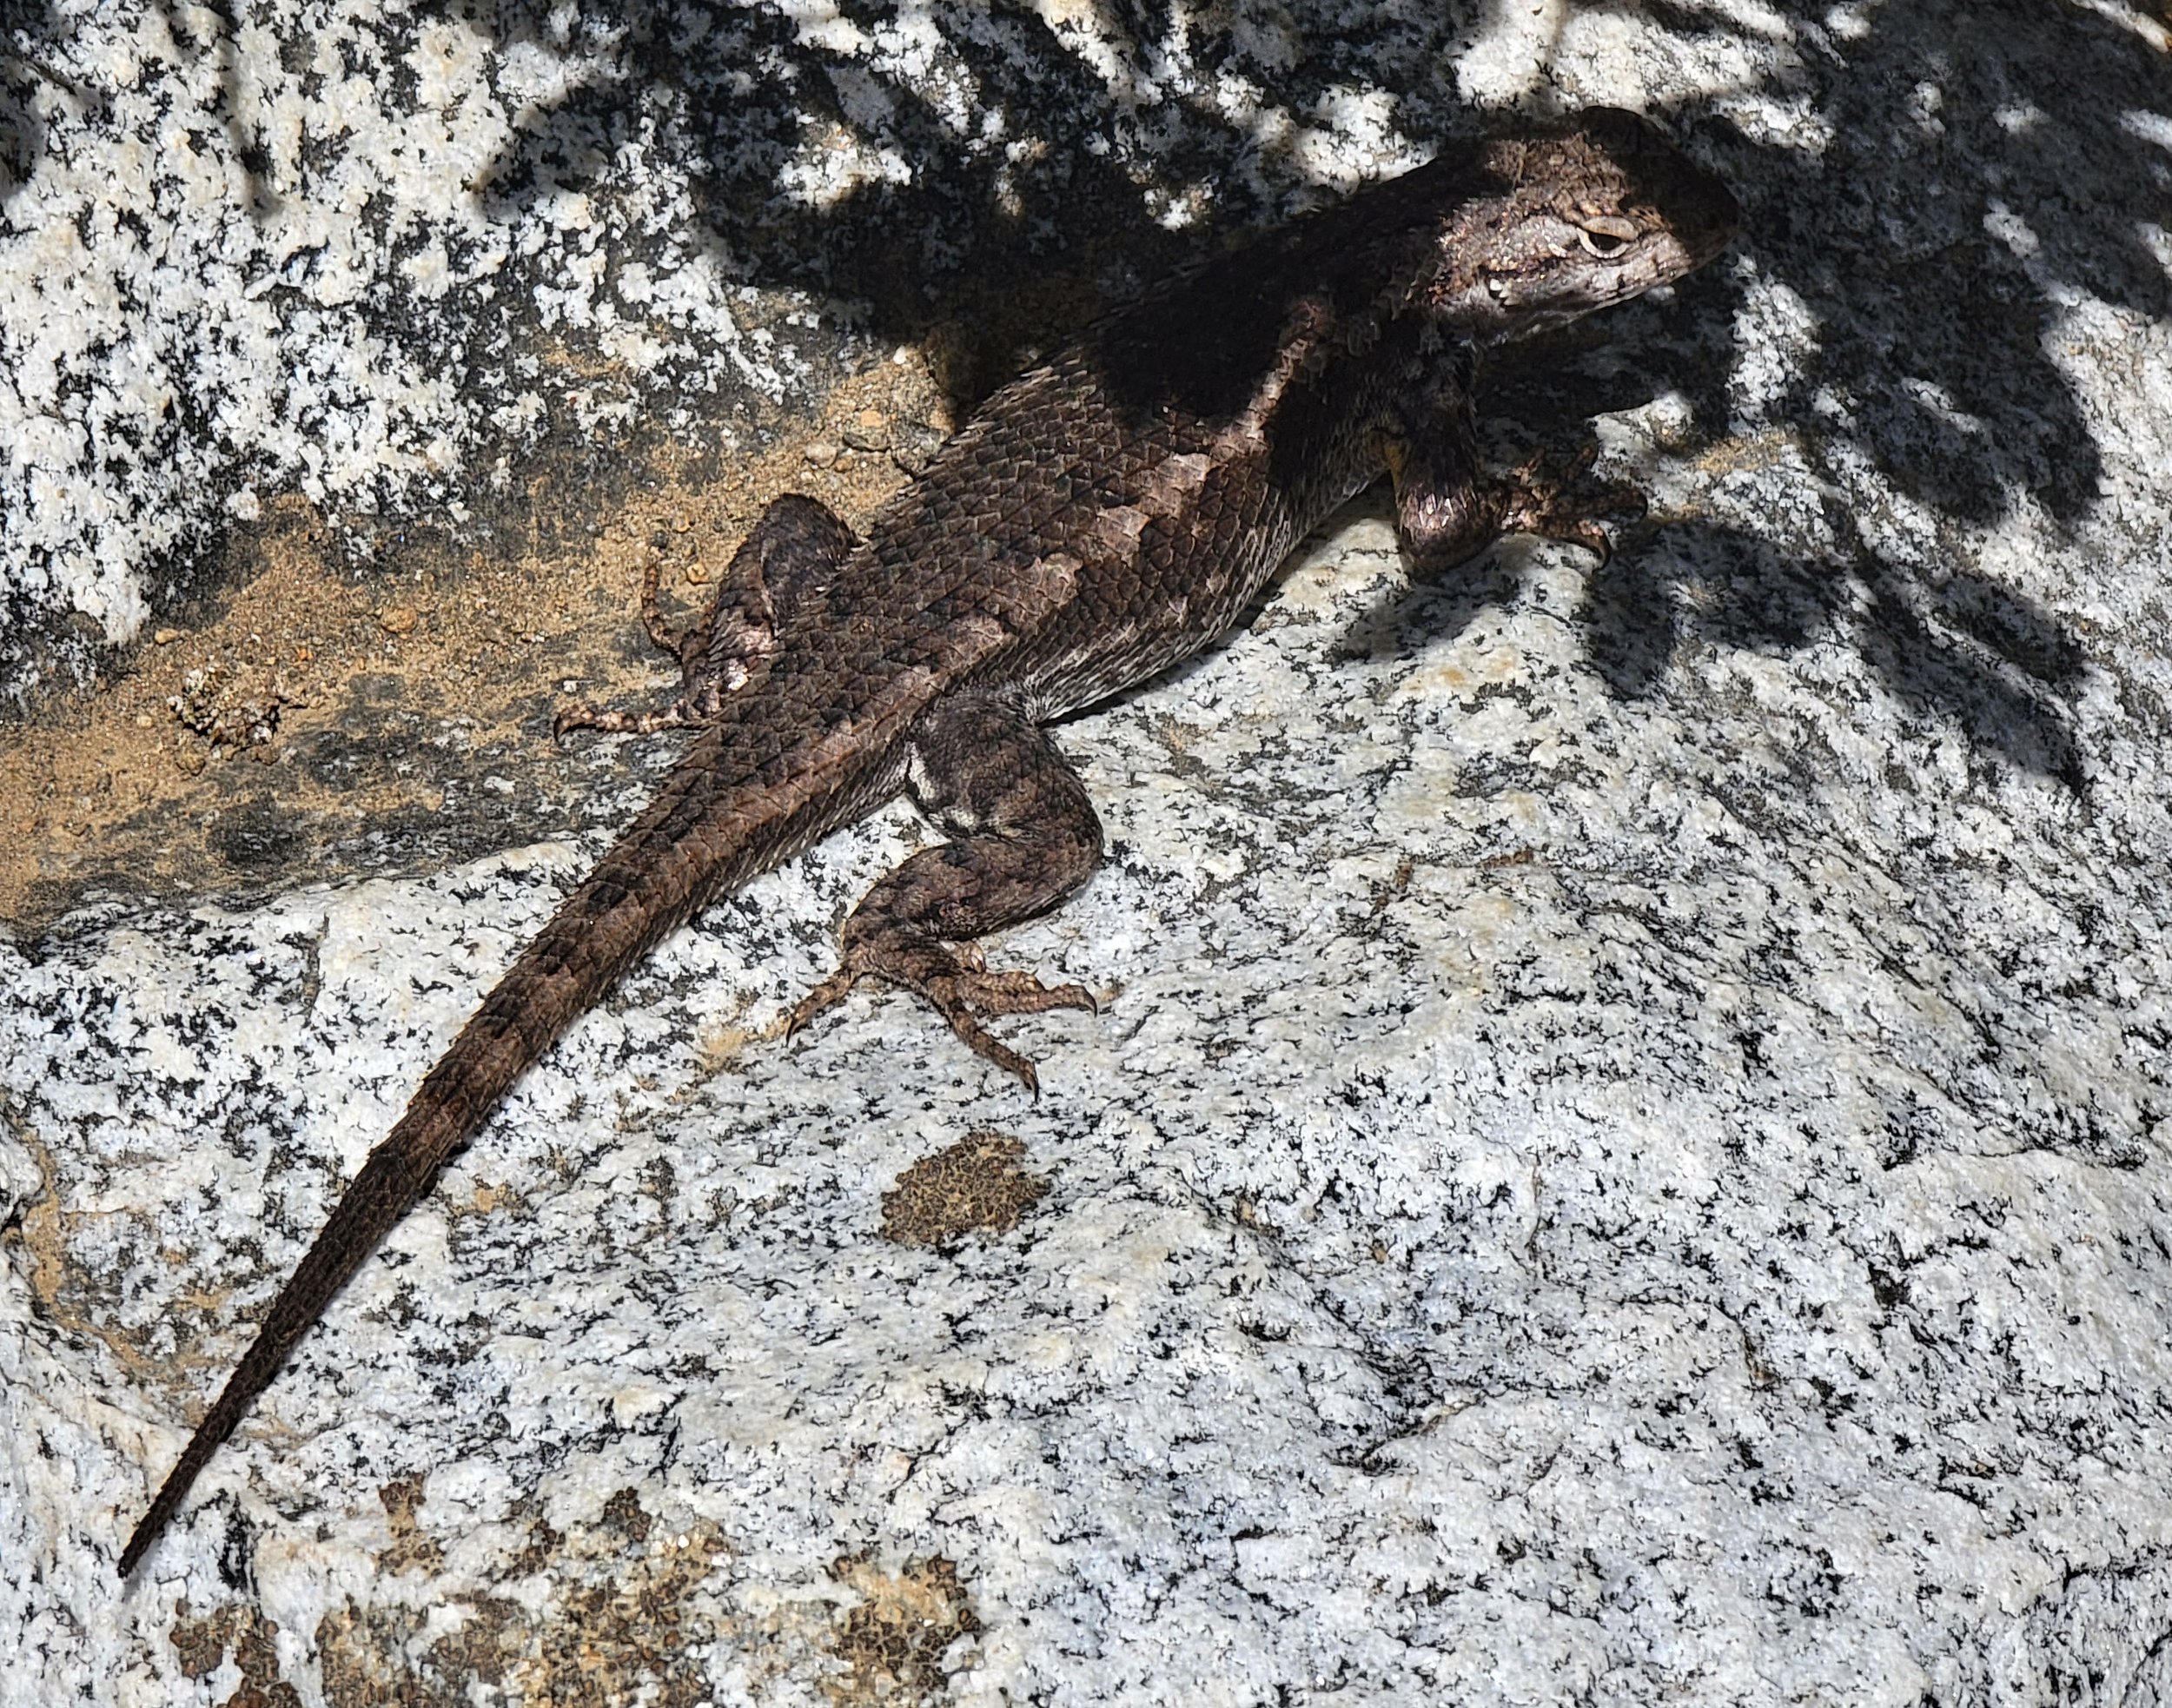 This thing is a "Plated Fence Lizard" apparently. These tiny guys are running all over the place in the region.